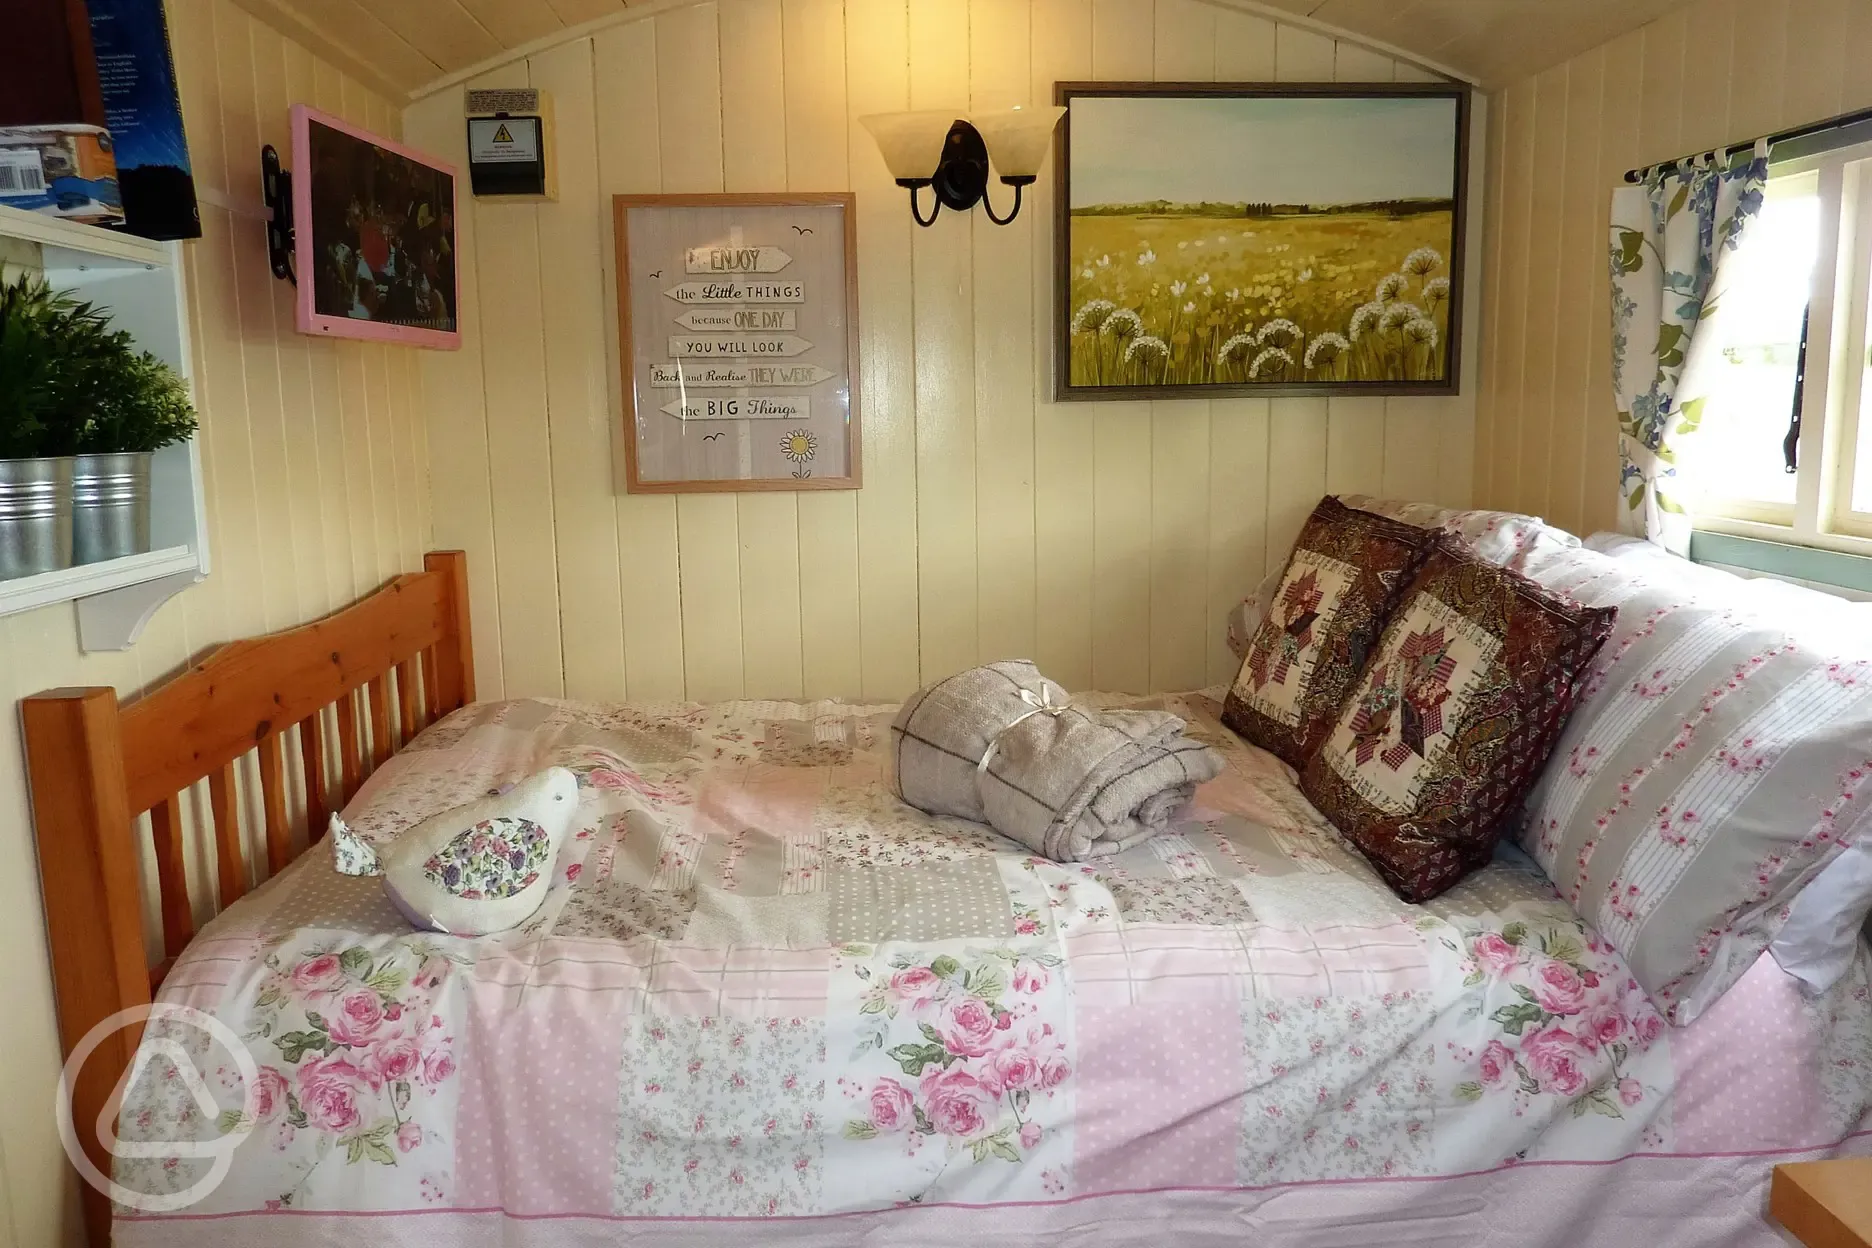 Bed inside the Shepherds Hut at The Buteland Stop